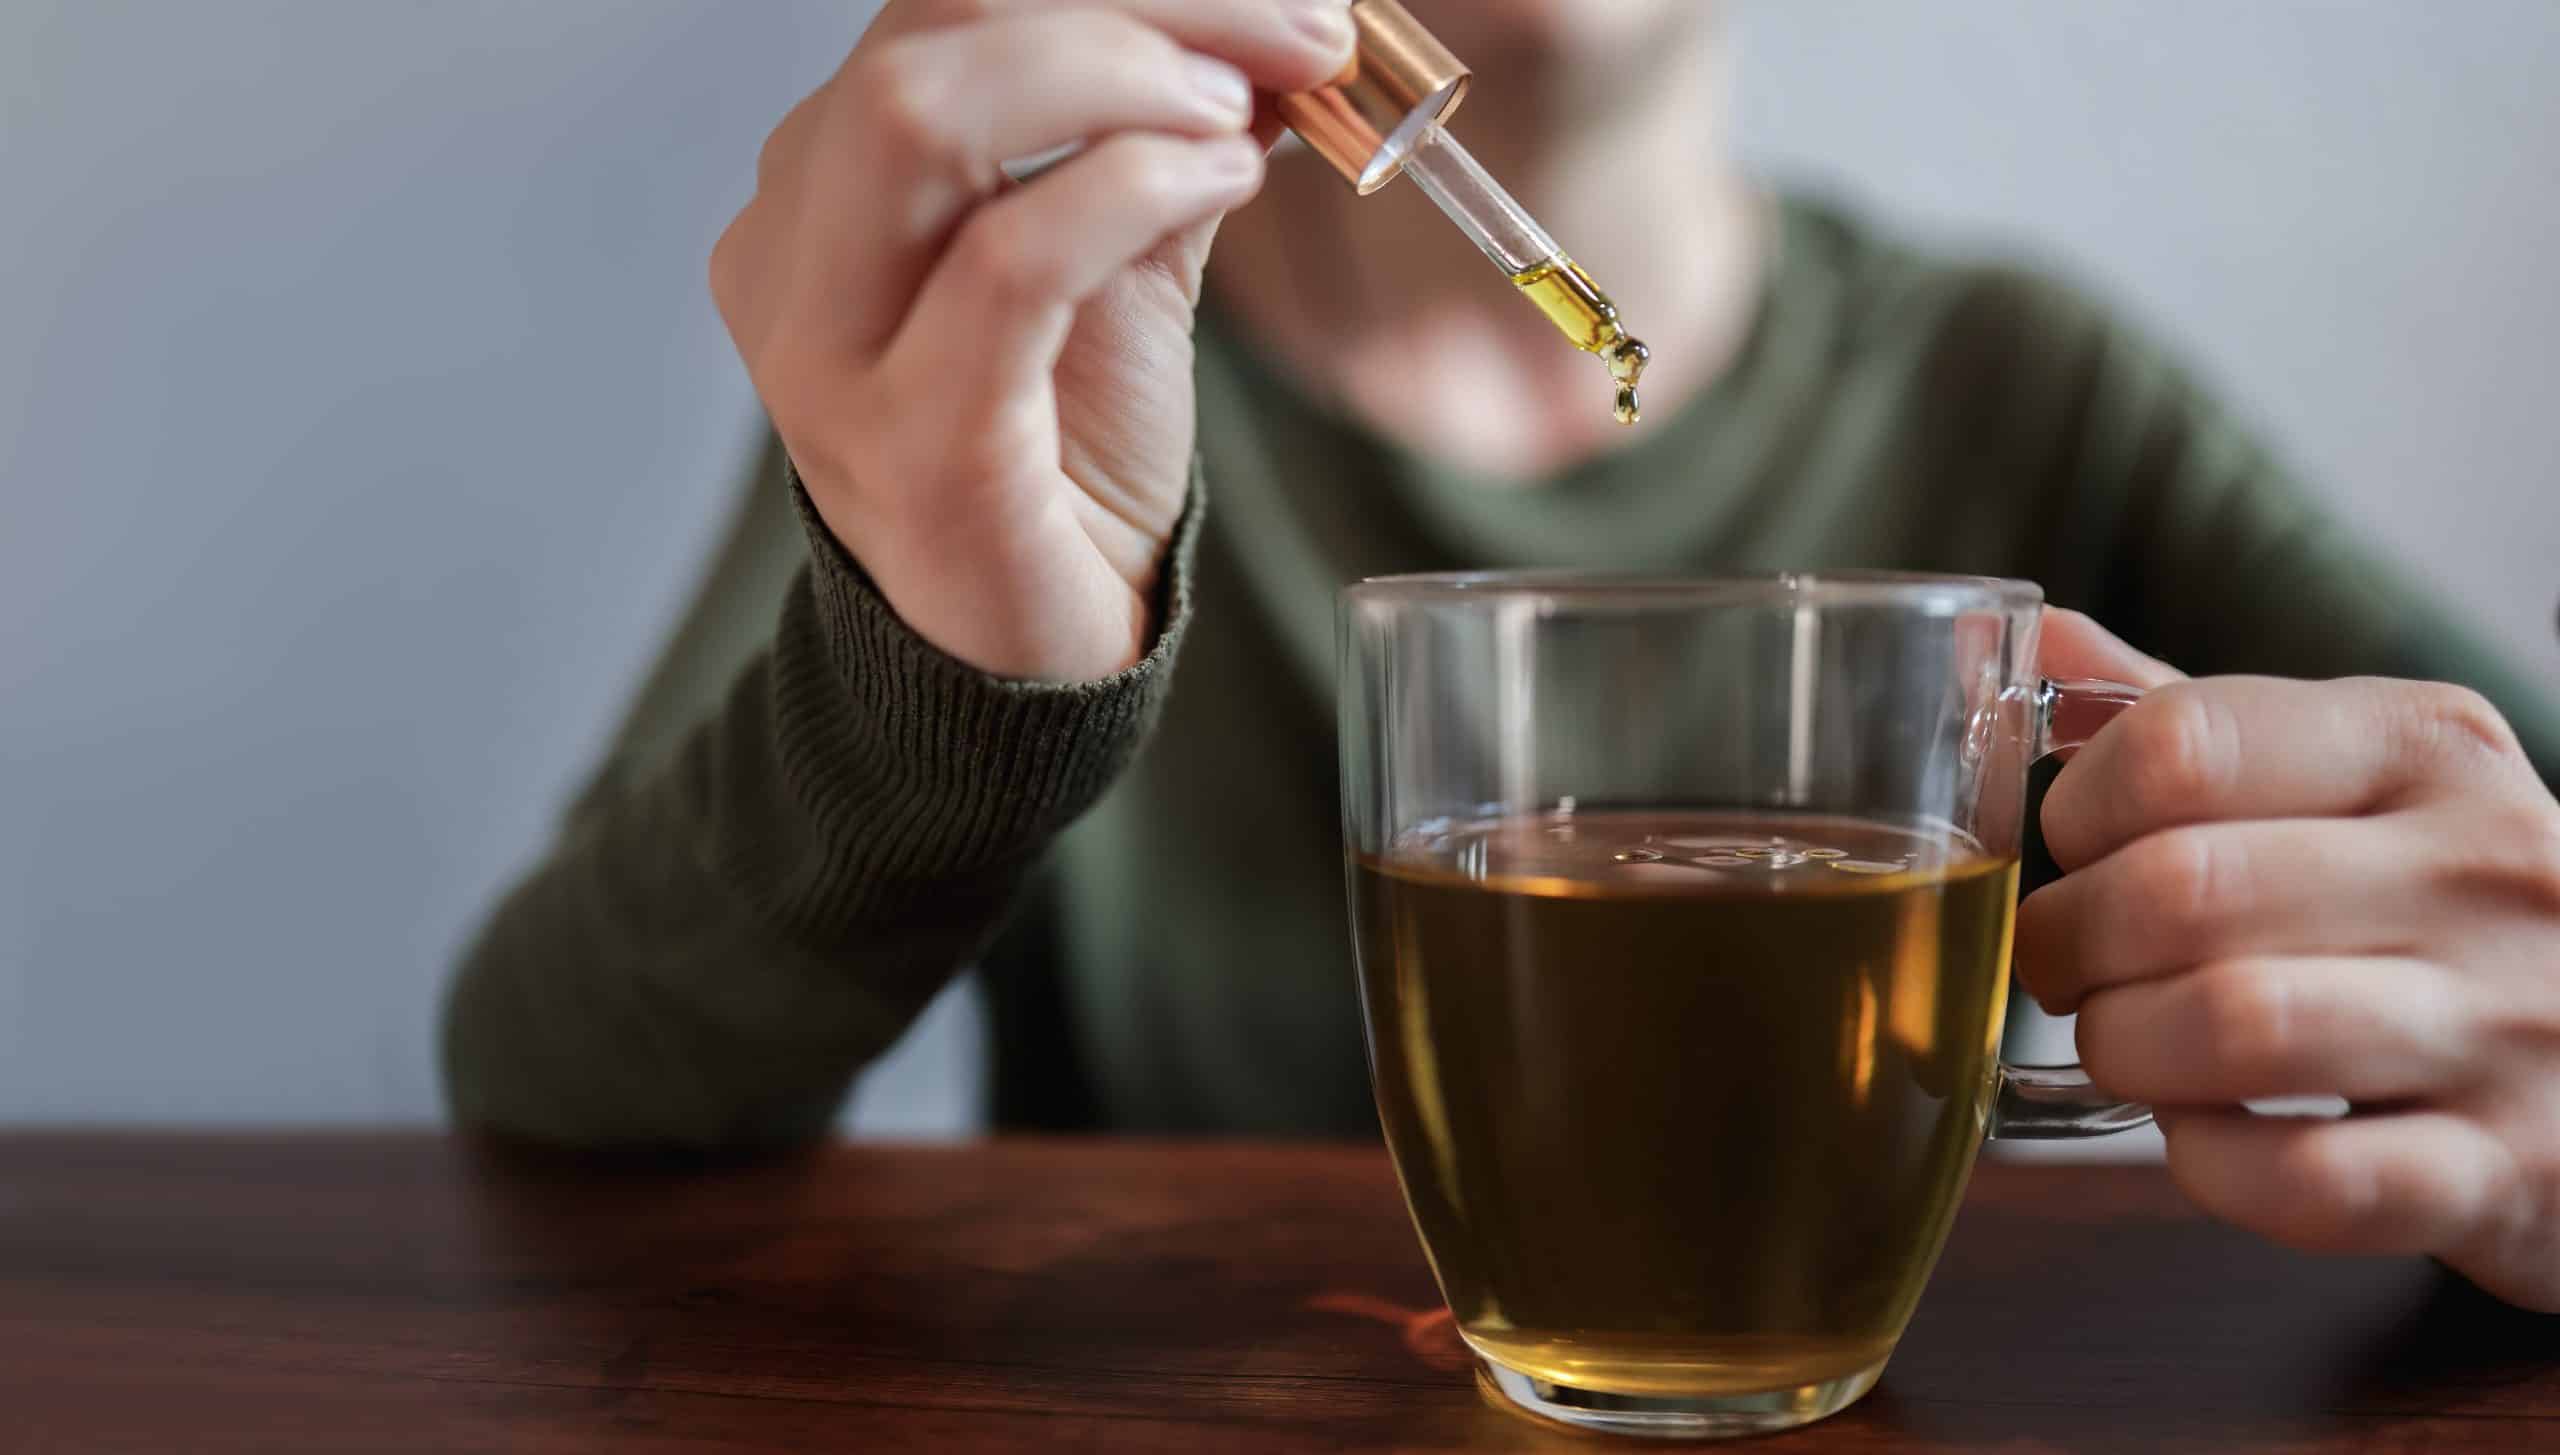 Pros and Cons of CBD Oil for Anxiety